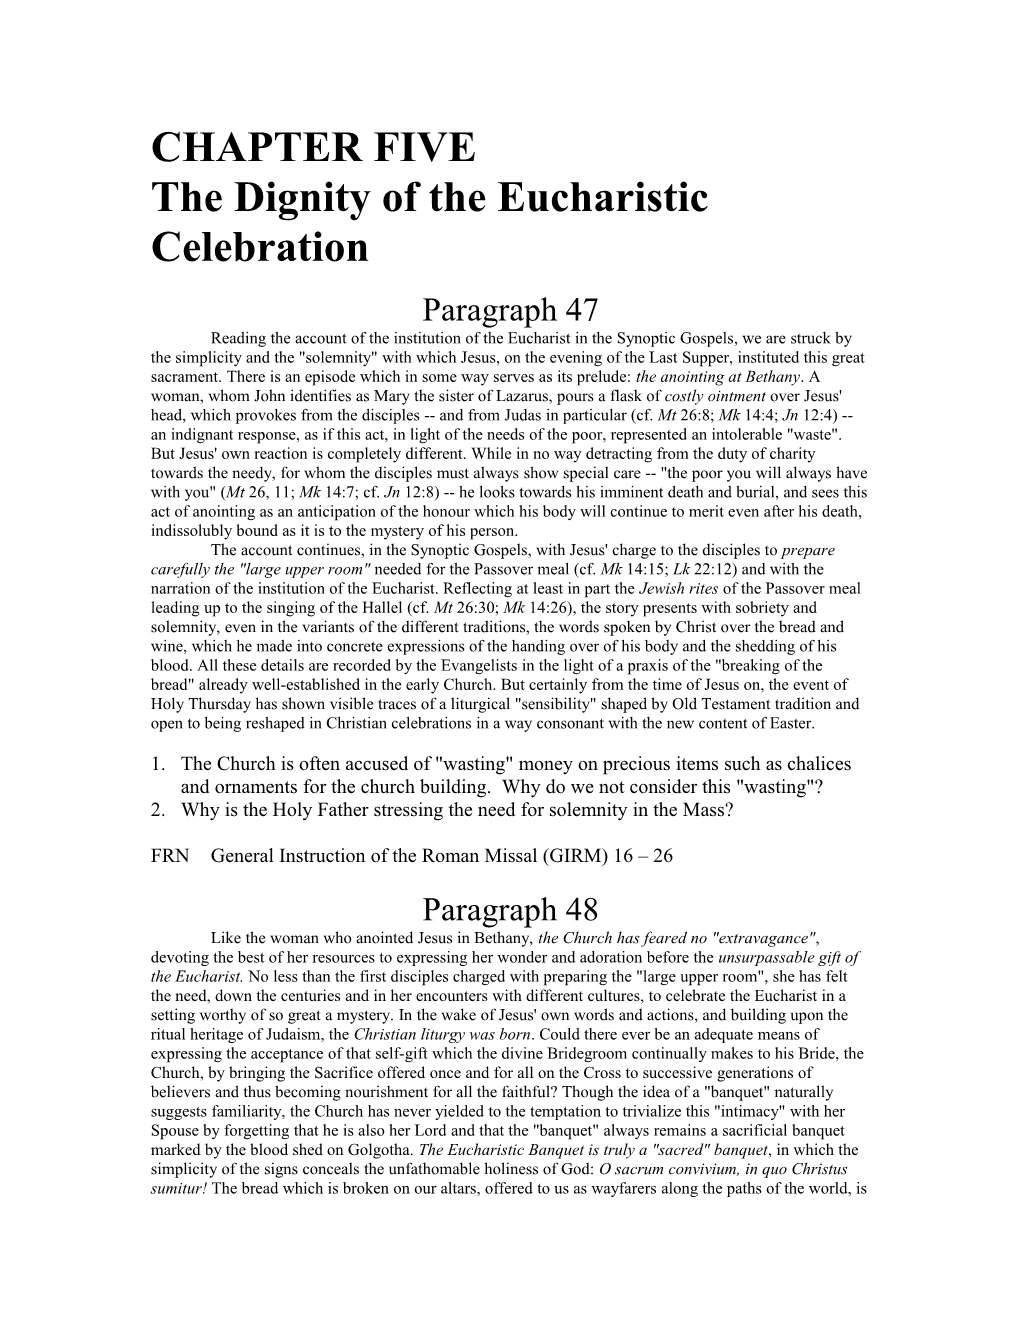 CHAPTER FIVE the Dignity of the Eucharistic Celebration